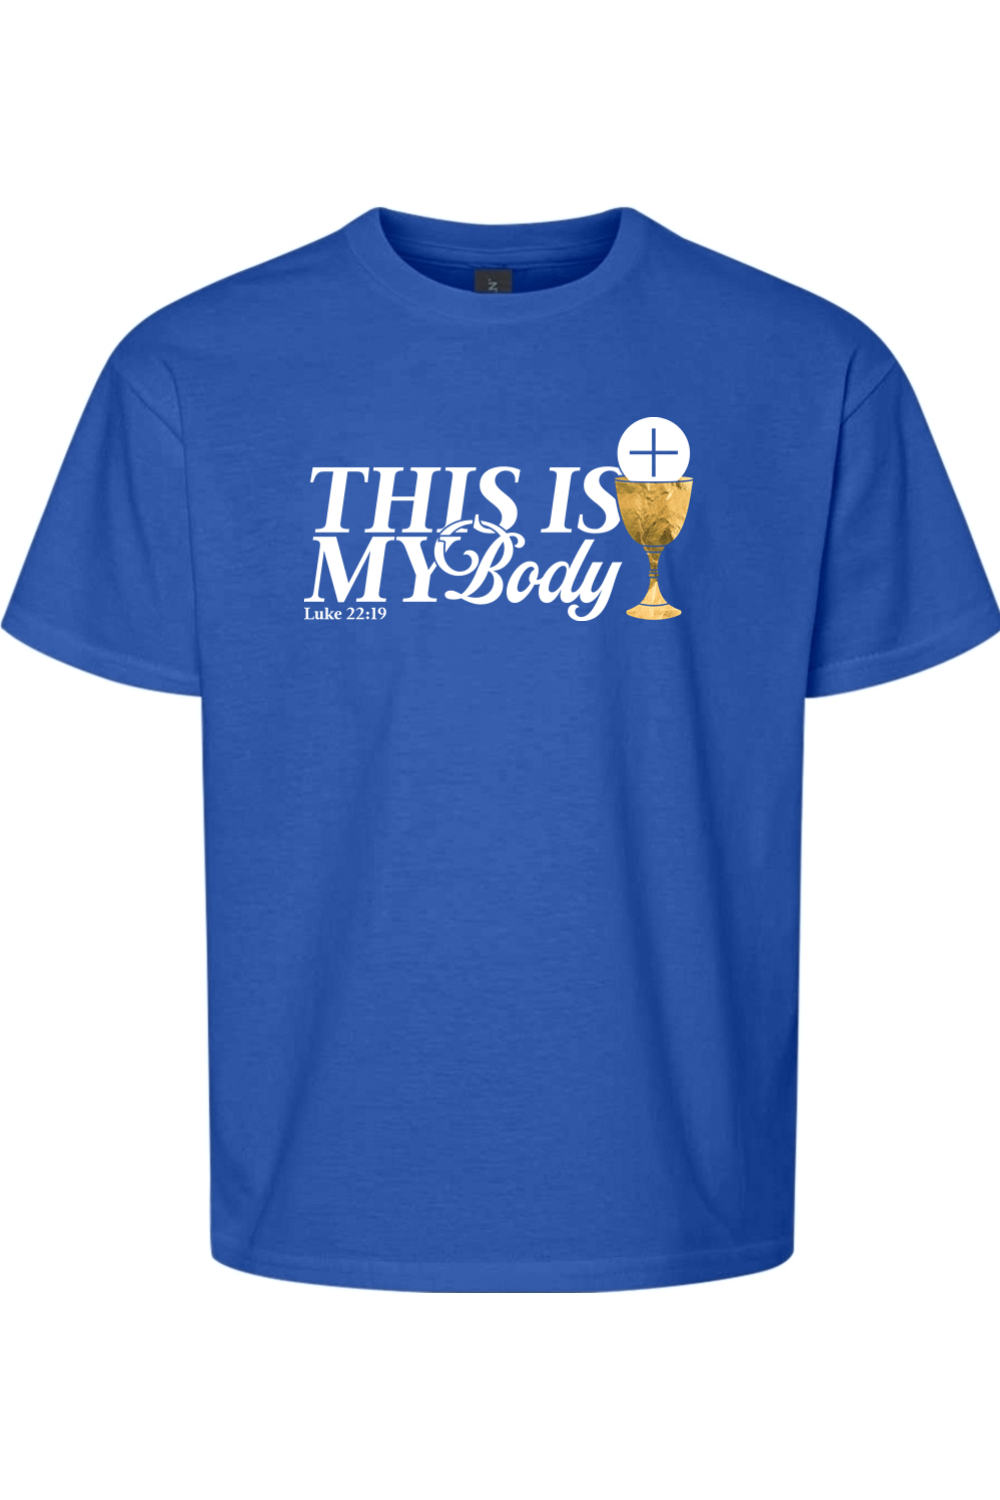 This is My Body Chalice - Luke 22:19 Youth T-Shirt